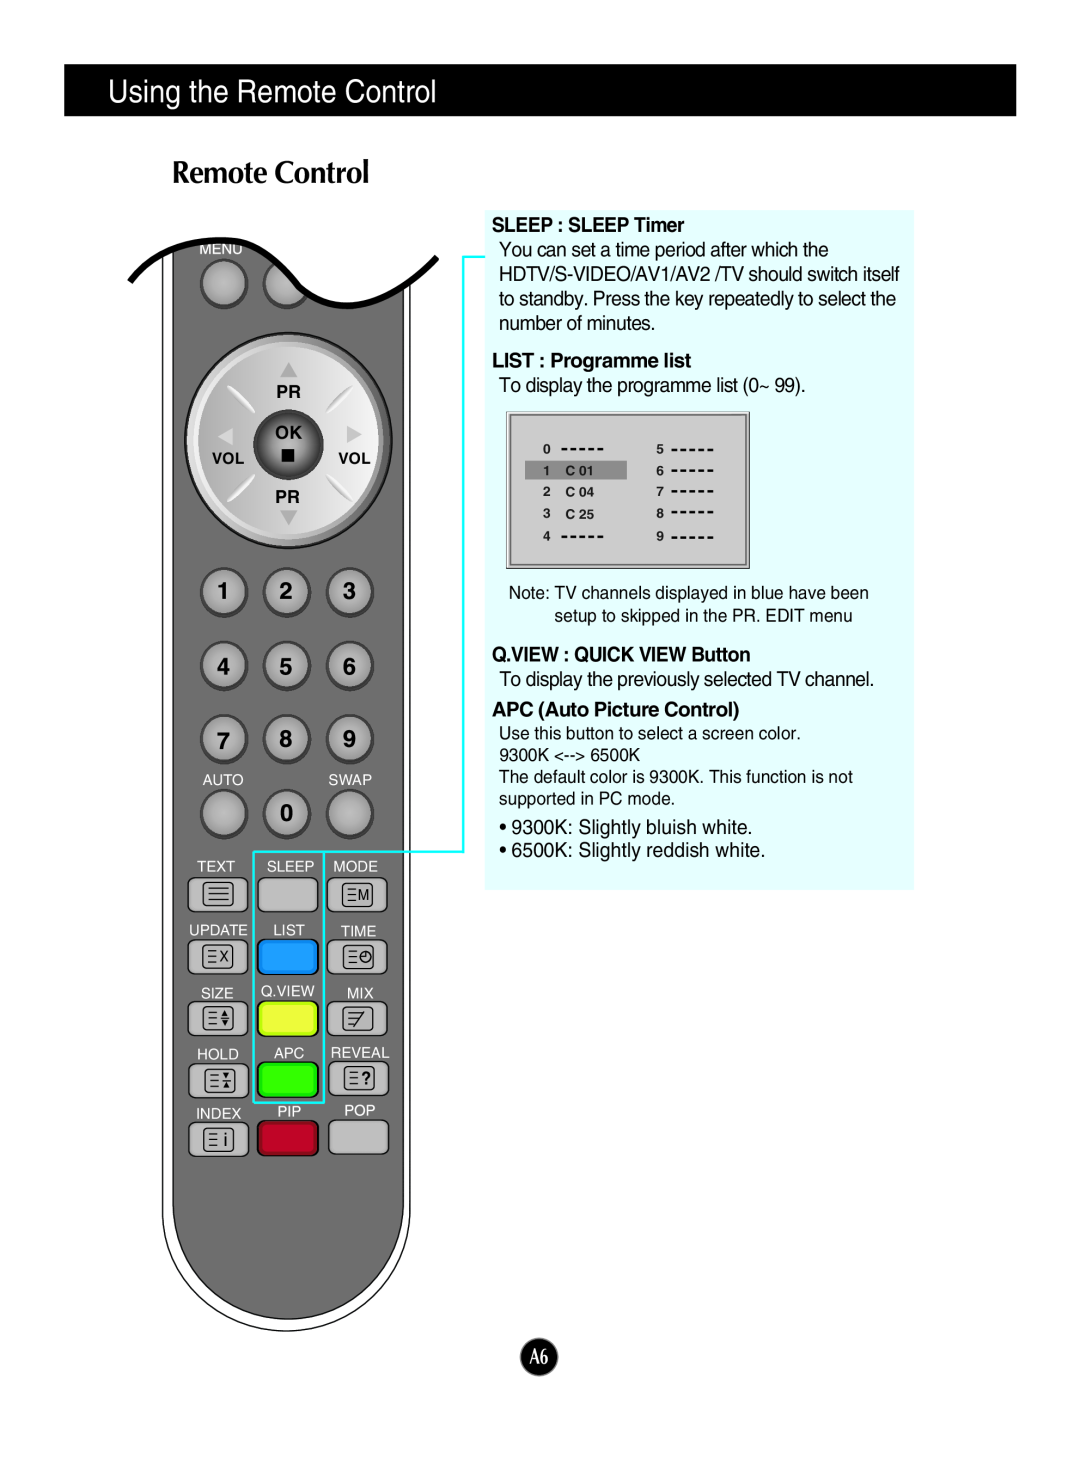 LG Electronics L2323T manual Using the Remote Control, SLEEP SLEEP Timer, LIST Programme list, Q.VIEW QUICK VIEW Button 